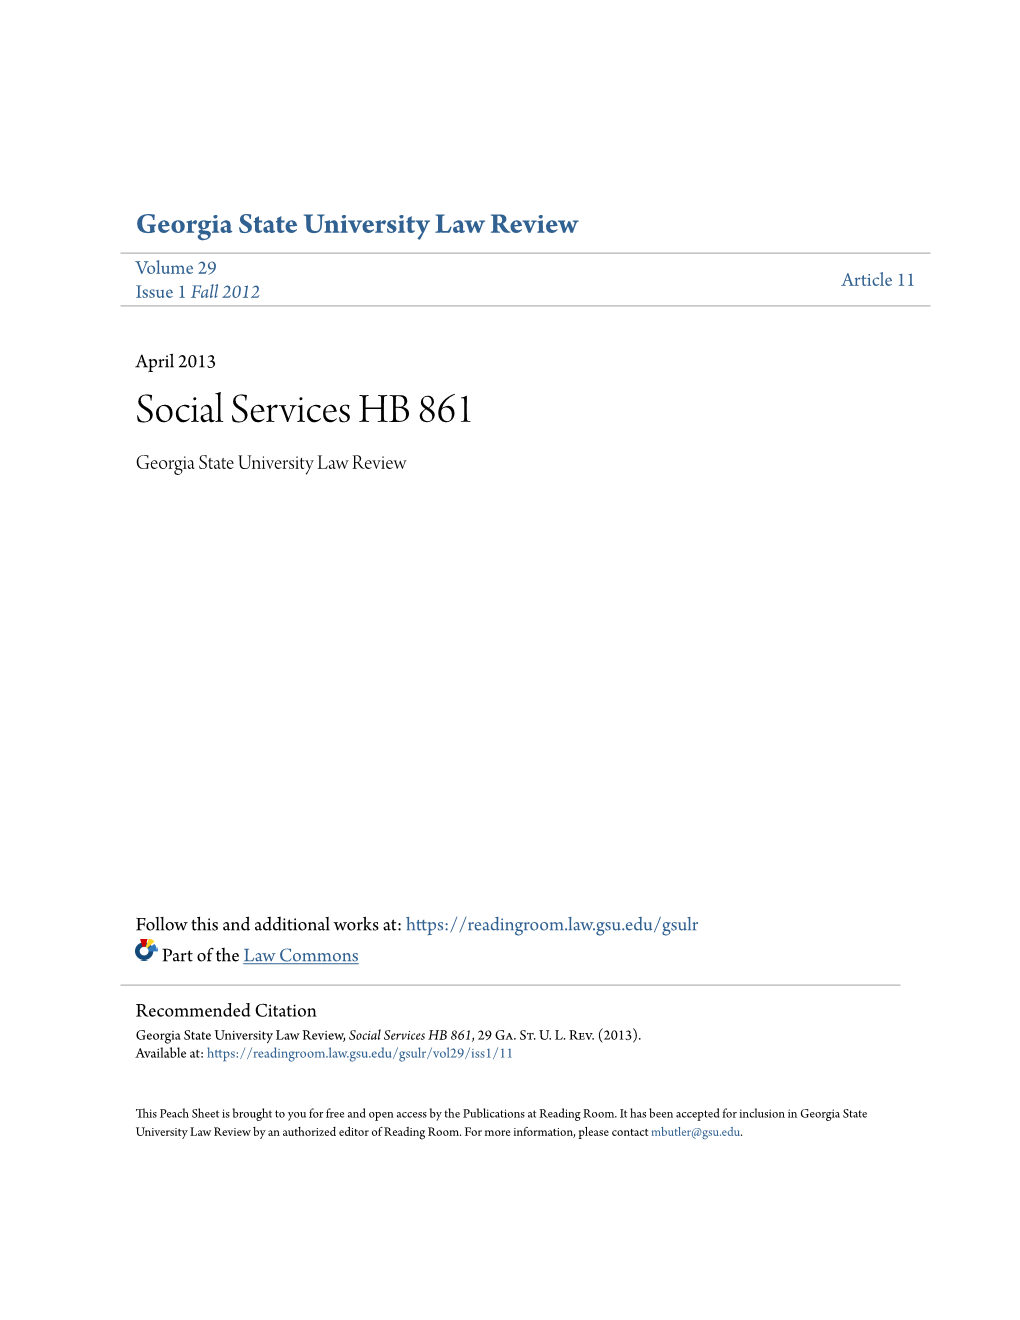 Social Services HB 861 Georgia State University Law Review